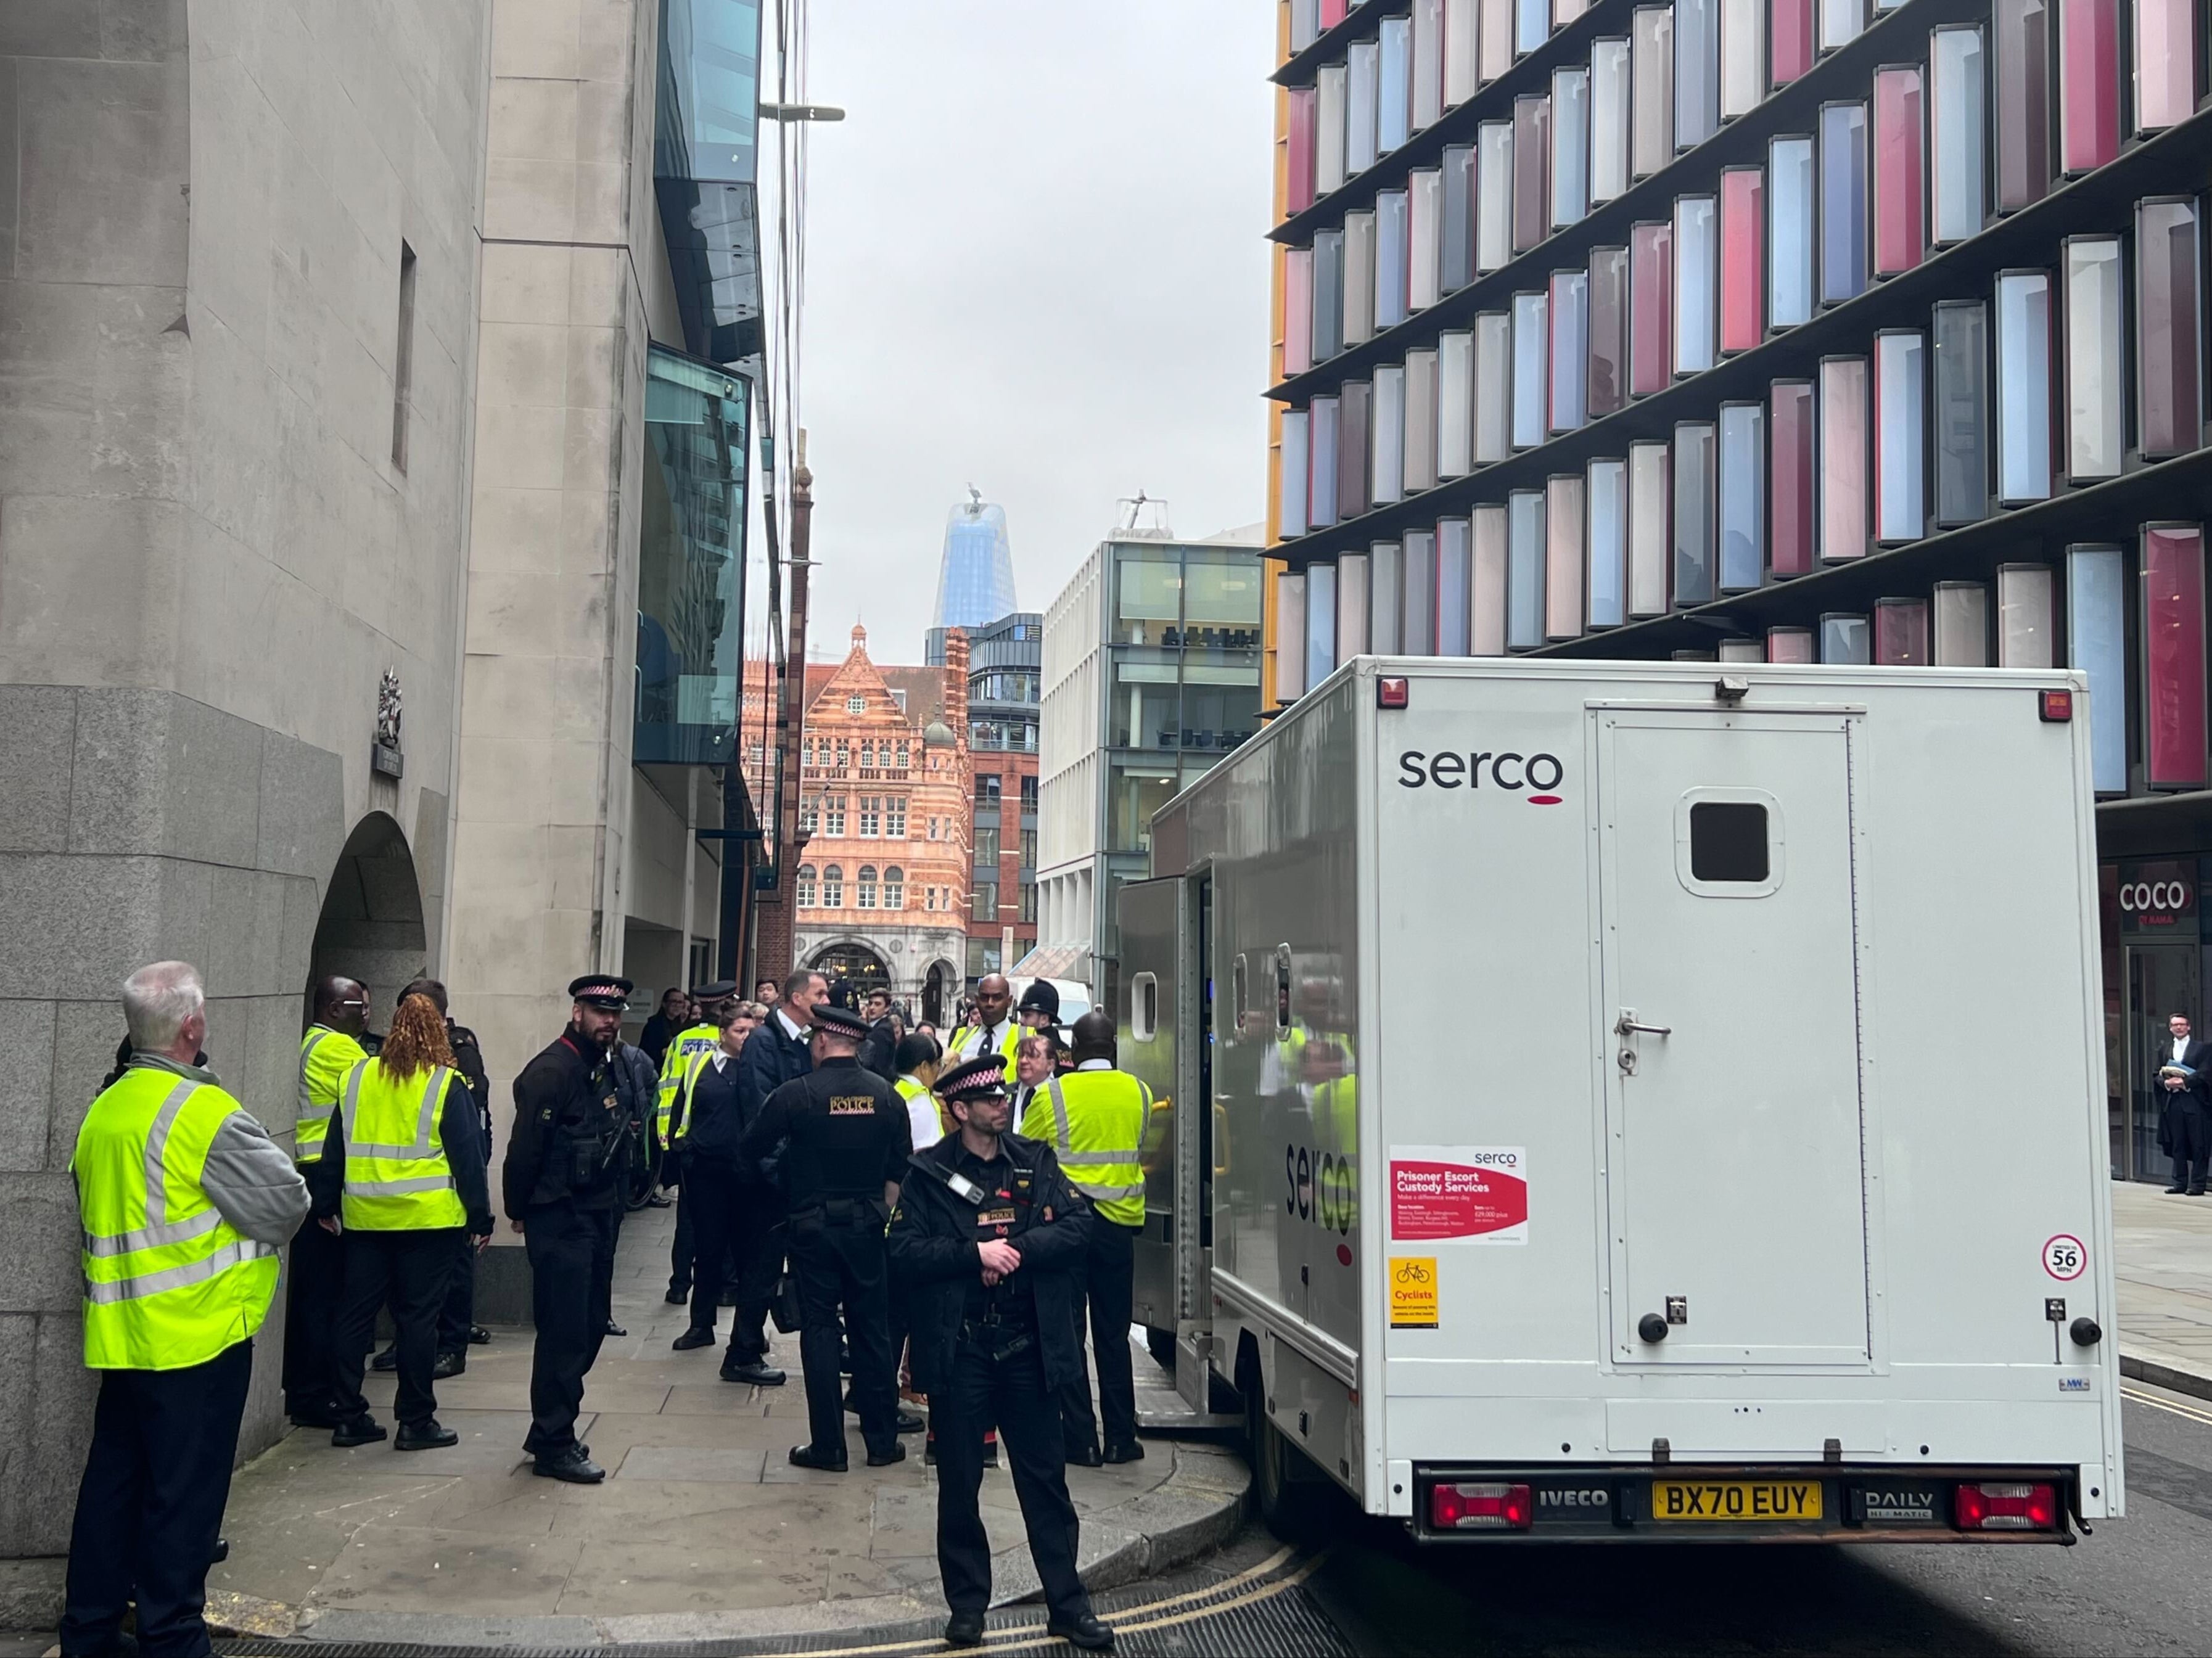 Defendants in custody were moved to prison vans after the court was evacuated